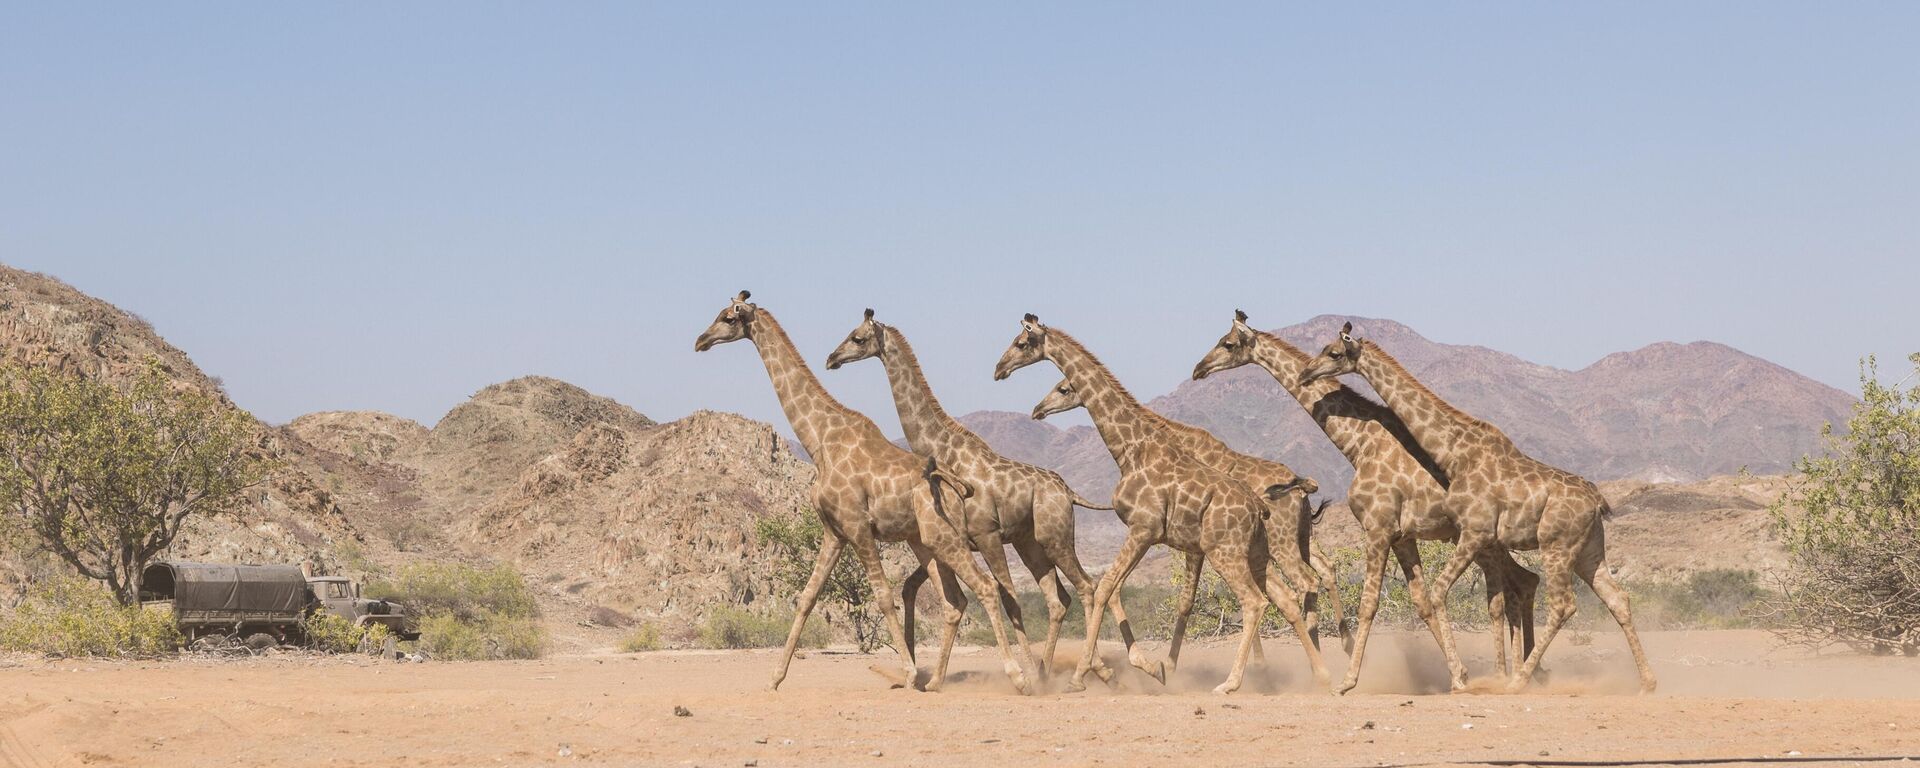 14 Angolan giraffes were successfully translocated from a private game farm in Namibia to Iona National Park in Angola. - Sputnik Africa, 1920, 09.07.2023